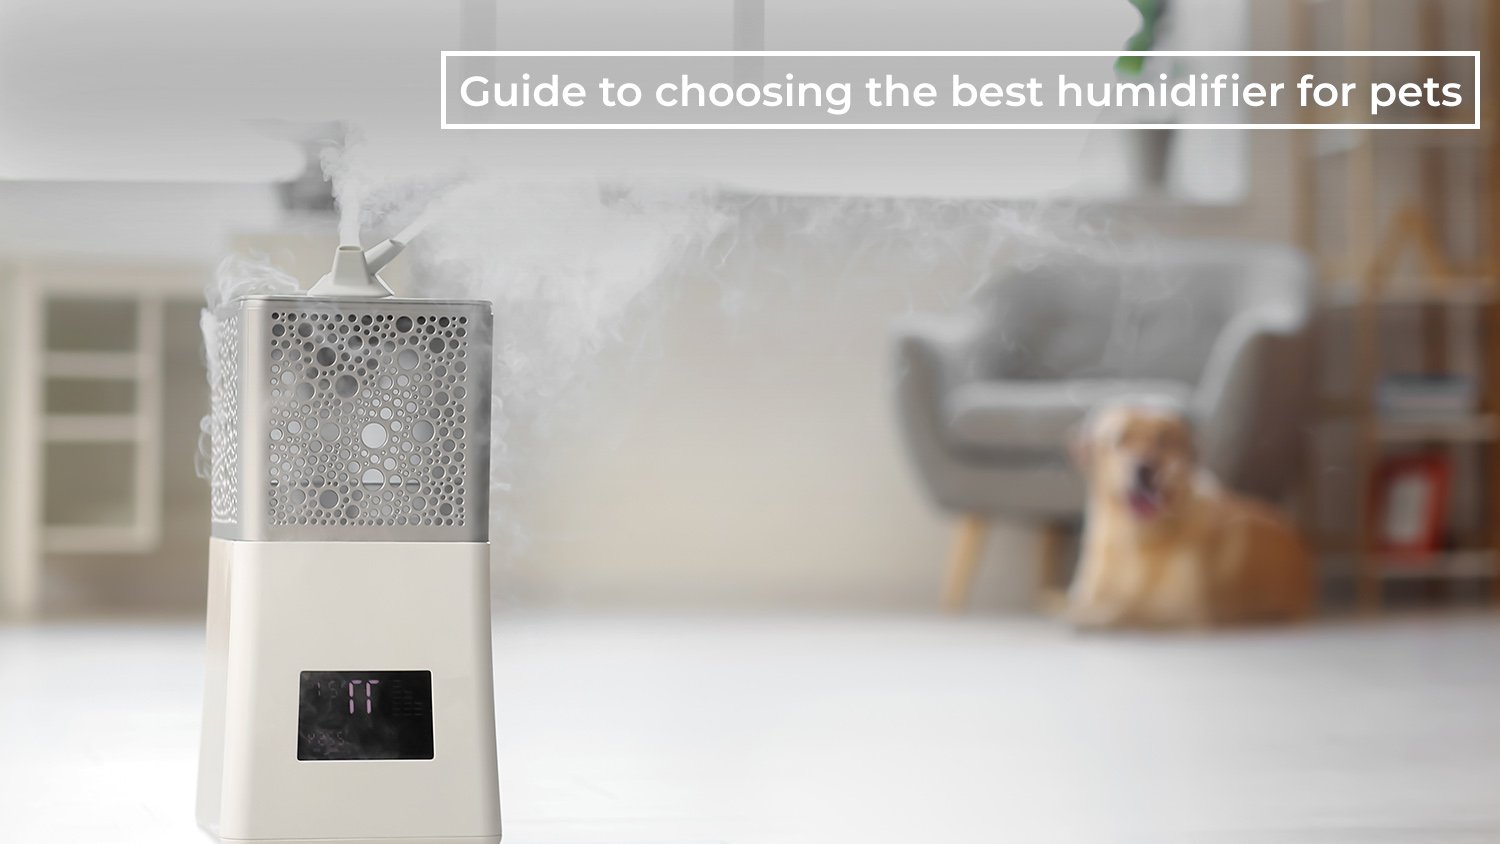 The ultimate guide to choosing the best humidifier for pets